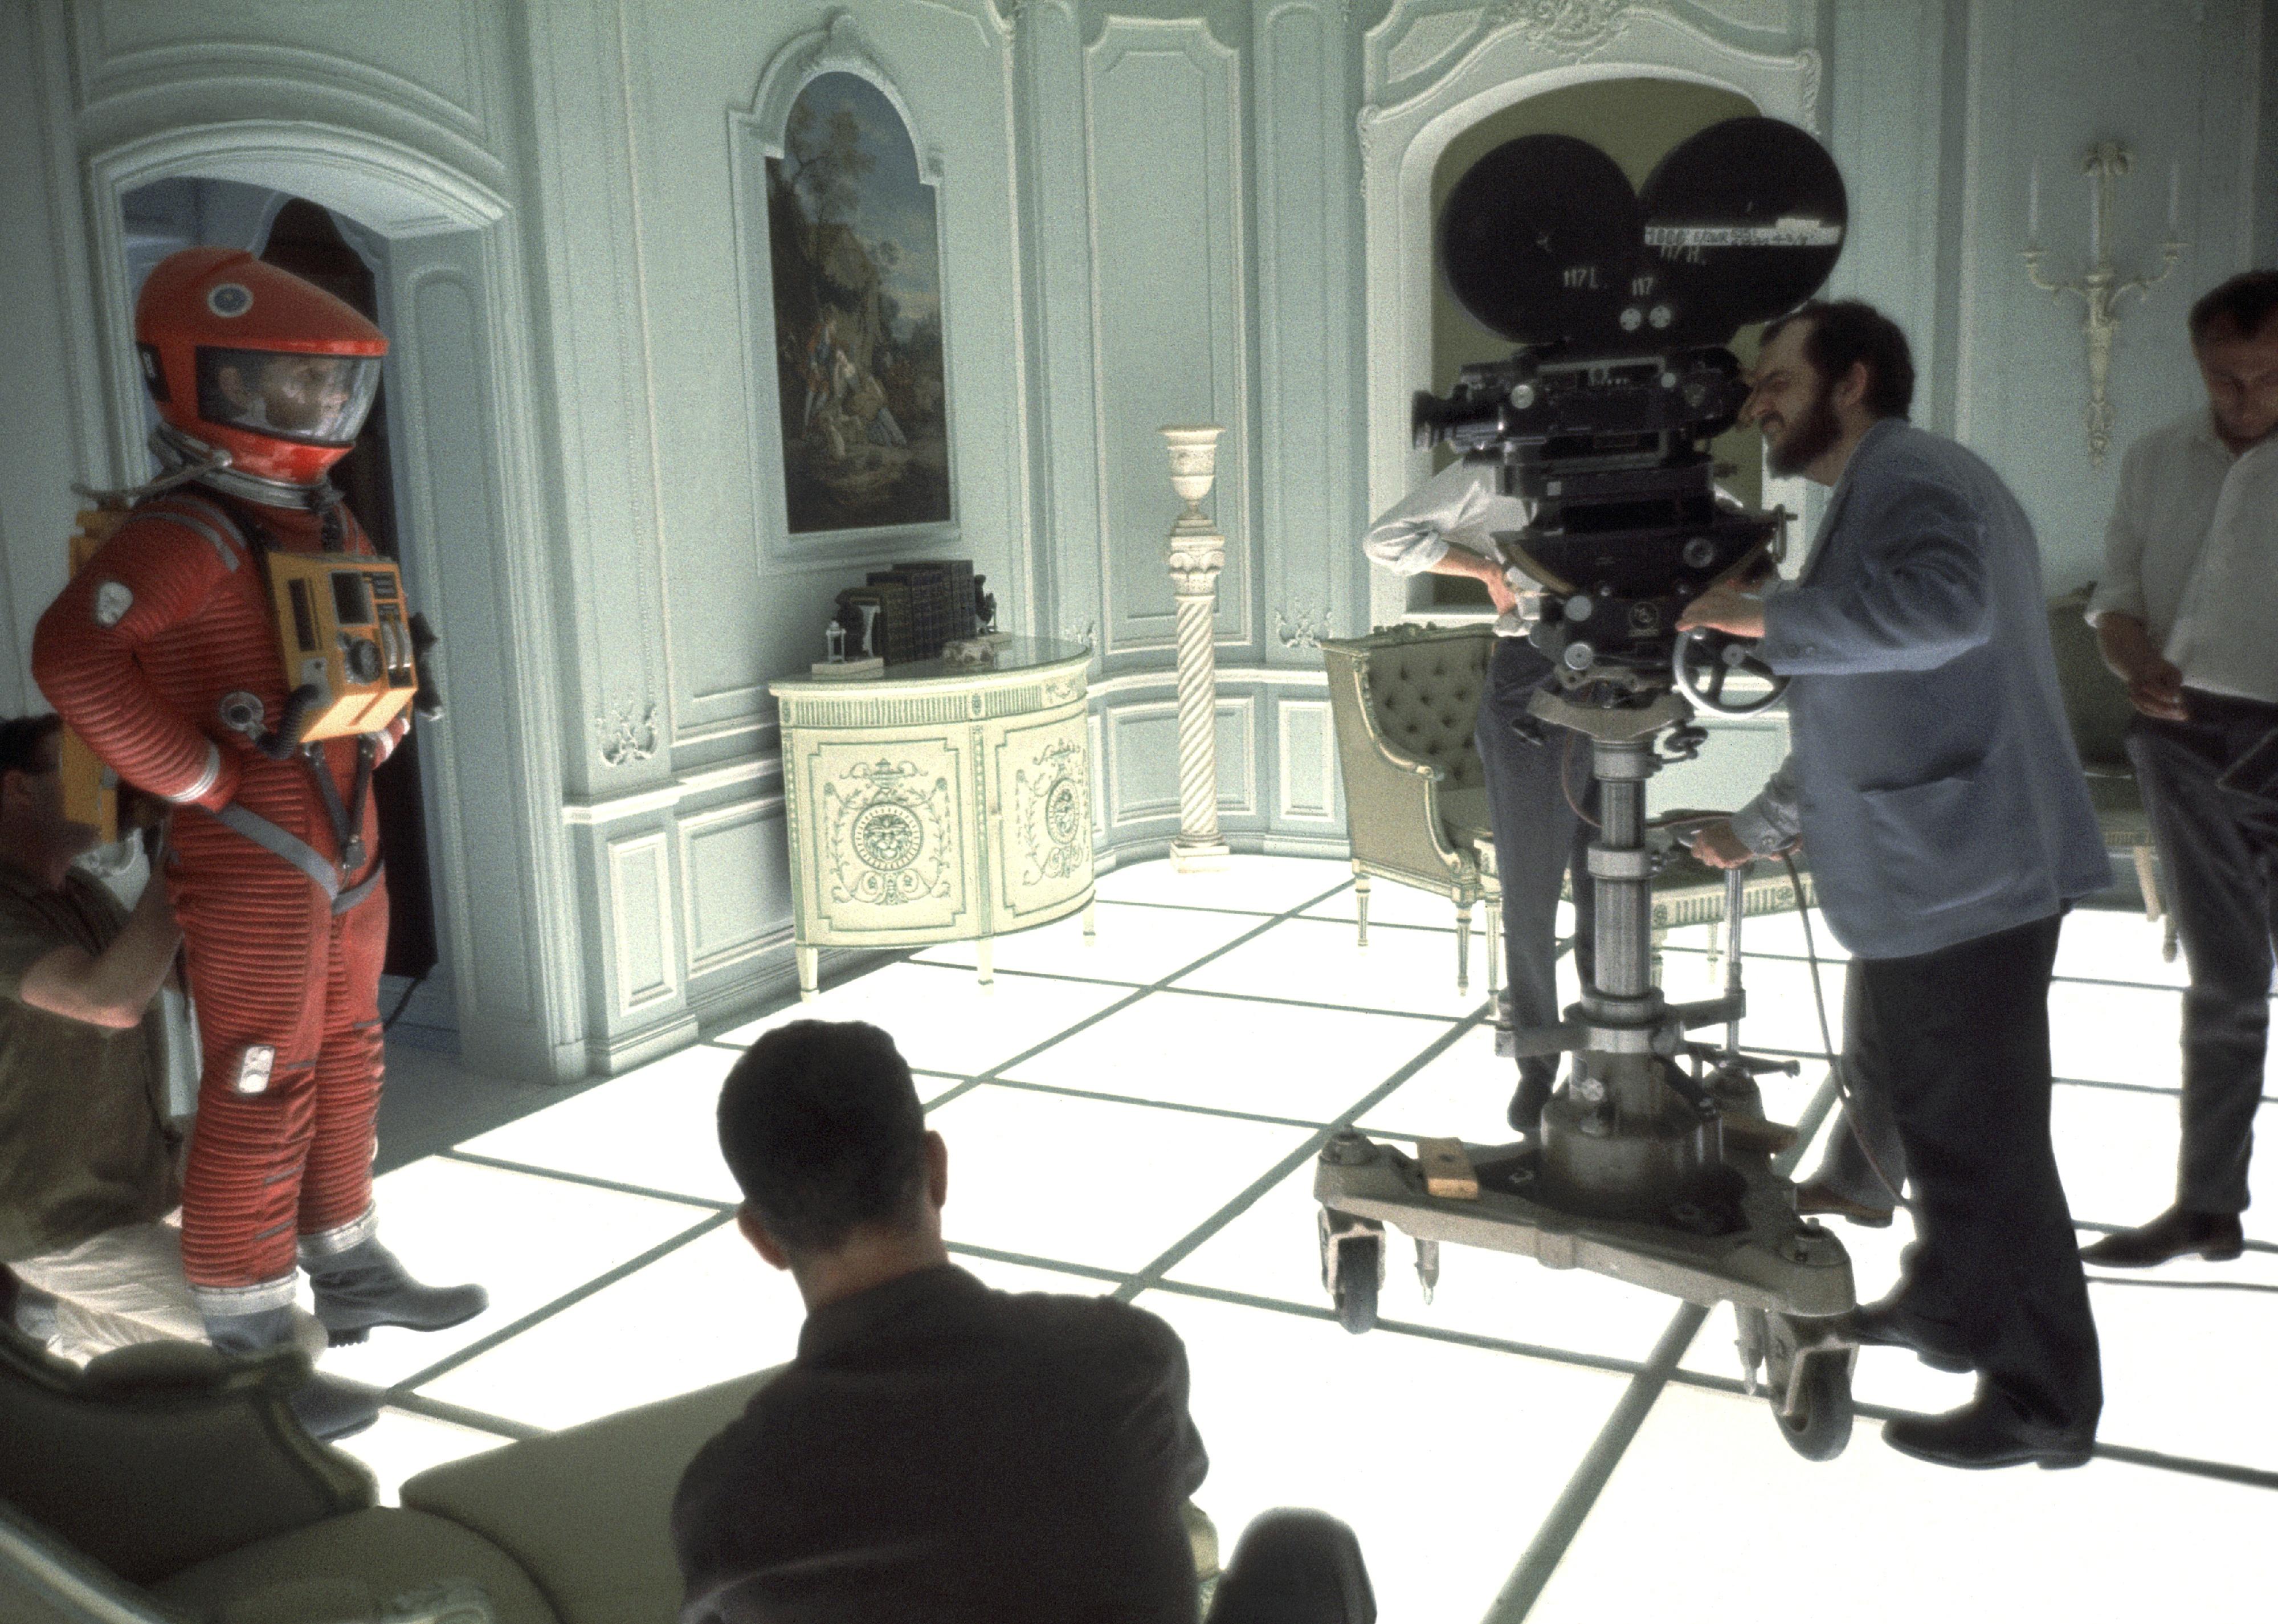 Film director Stanley Kubrick finds his shot on the set of 2001: A Space Odyssey.